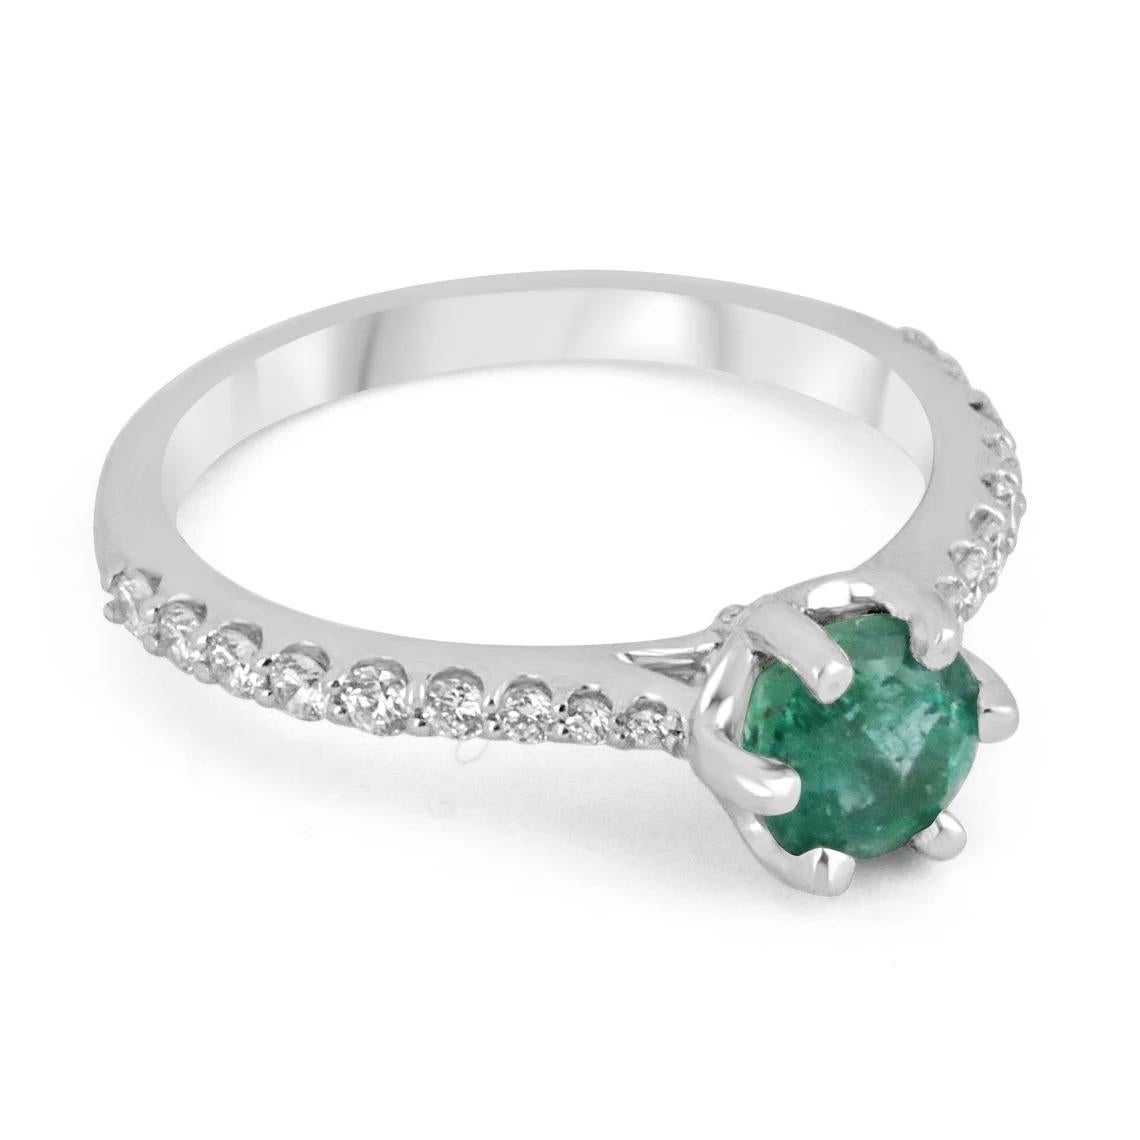 Elegantly displayed is a natural emerald and diamond engagement ring. The center stone carries a full carat, of natural round cut Zambian emerald with impressive qualities; vivid medium-dark bluish-green color and excellent clarity. This